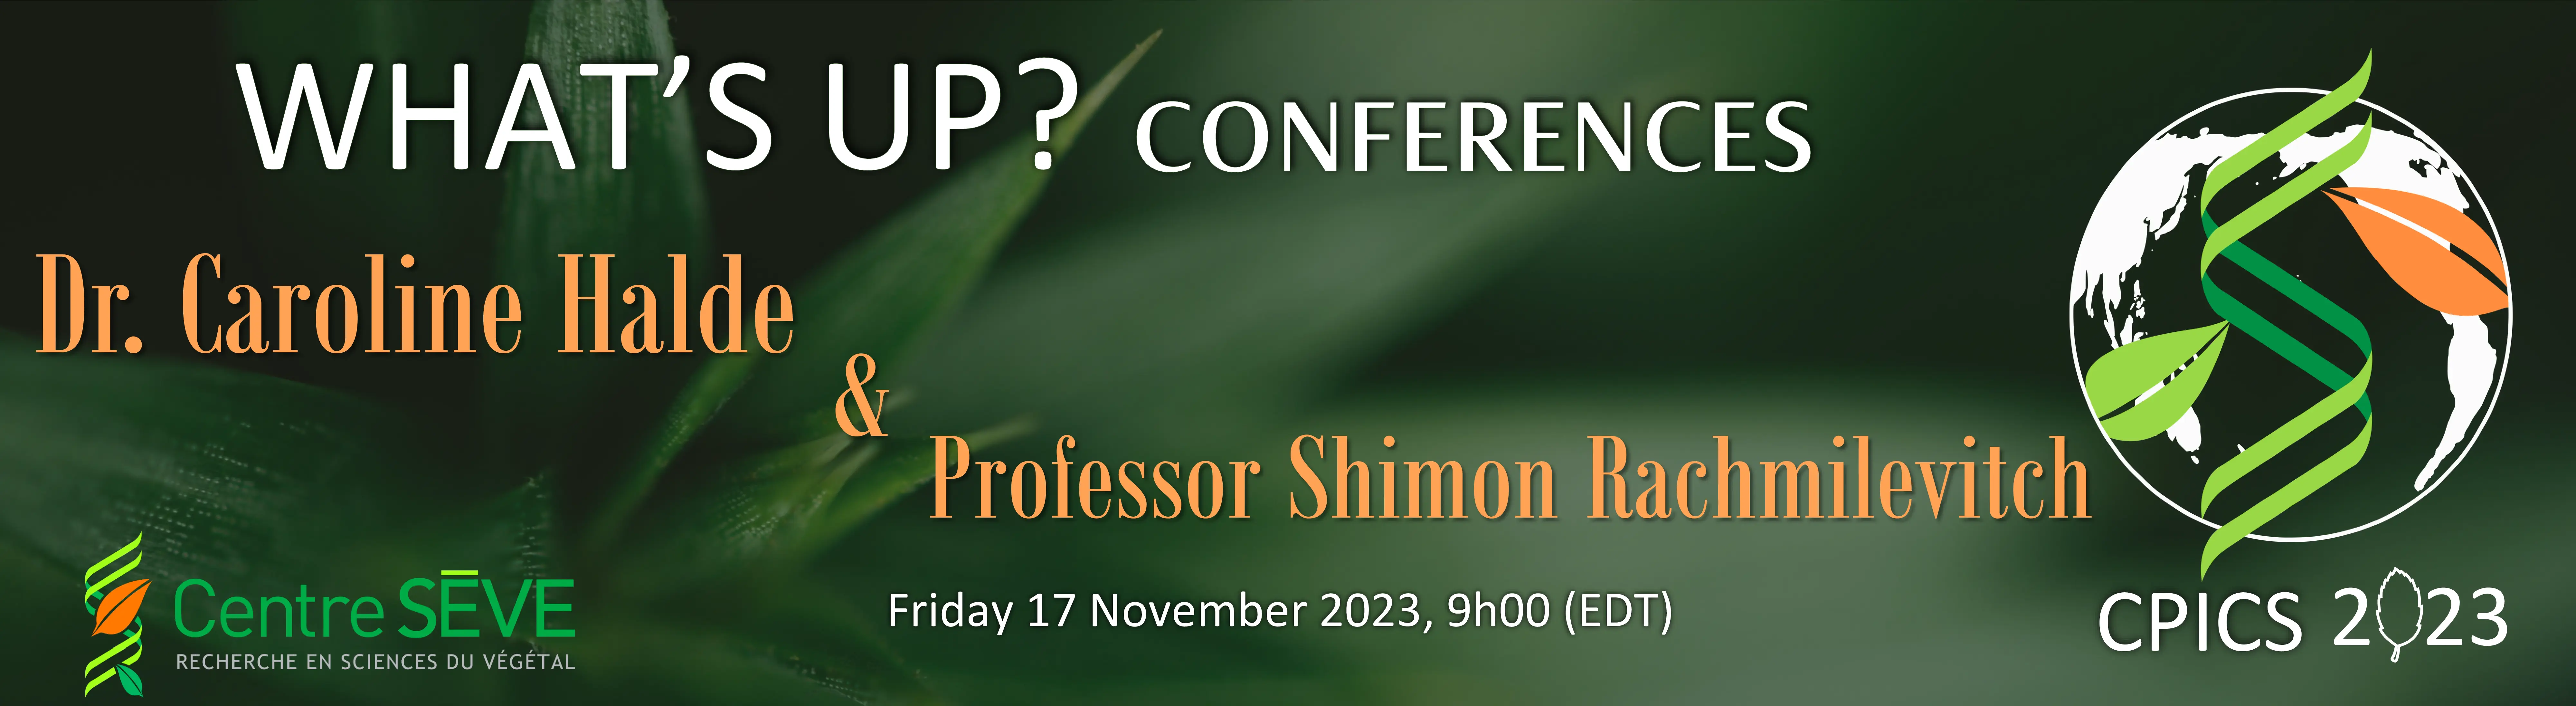 What's up conferences November 17h at 9h am with Dr. Shimon Rachmilevitch from the Ben-Gurion University of the Negev in Israel, and Dr. Caroline Halde, from the Université Laval